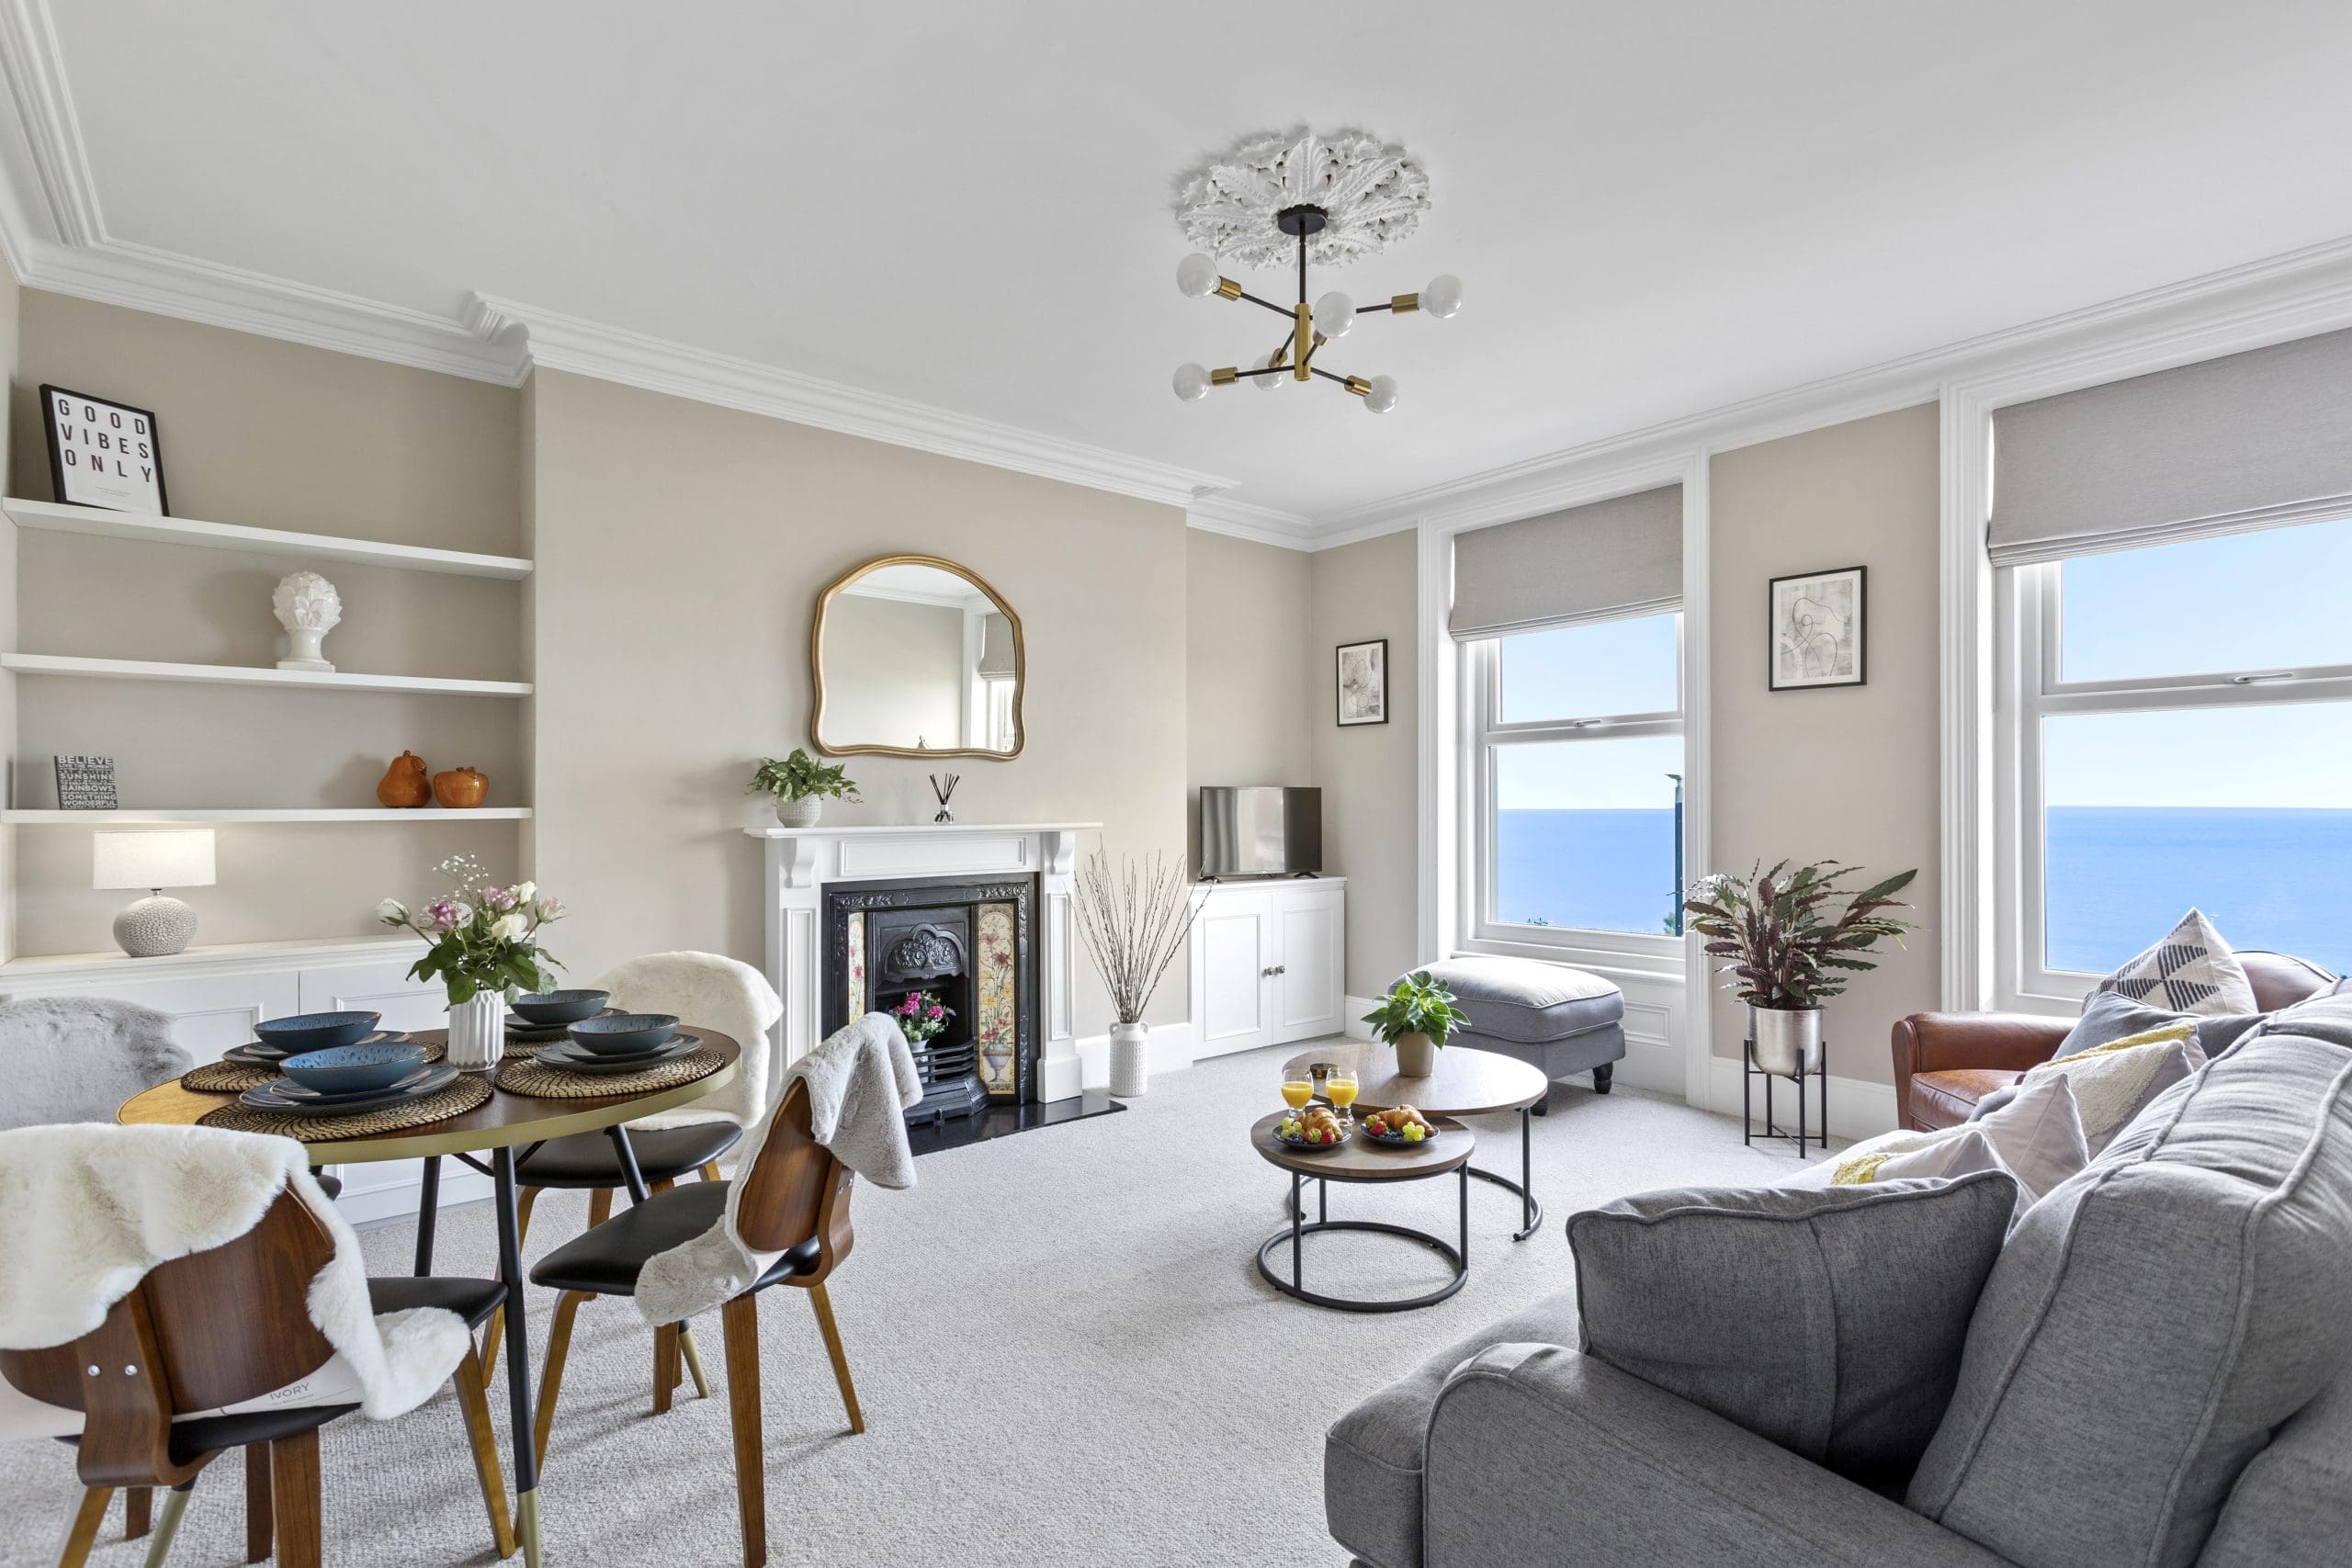 An image of a flat in Kent, you can see the sea just outside of the window. This is rented out for short-term rental or long-term rental by the property owner. The apartment is bright and spacious with a lounge filled with neutral but cosy tones.